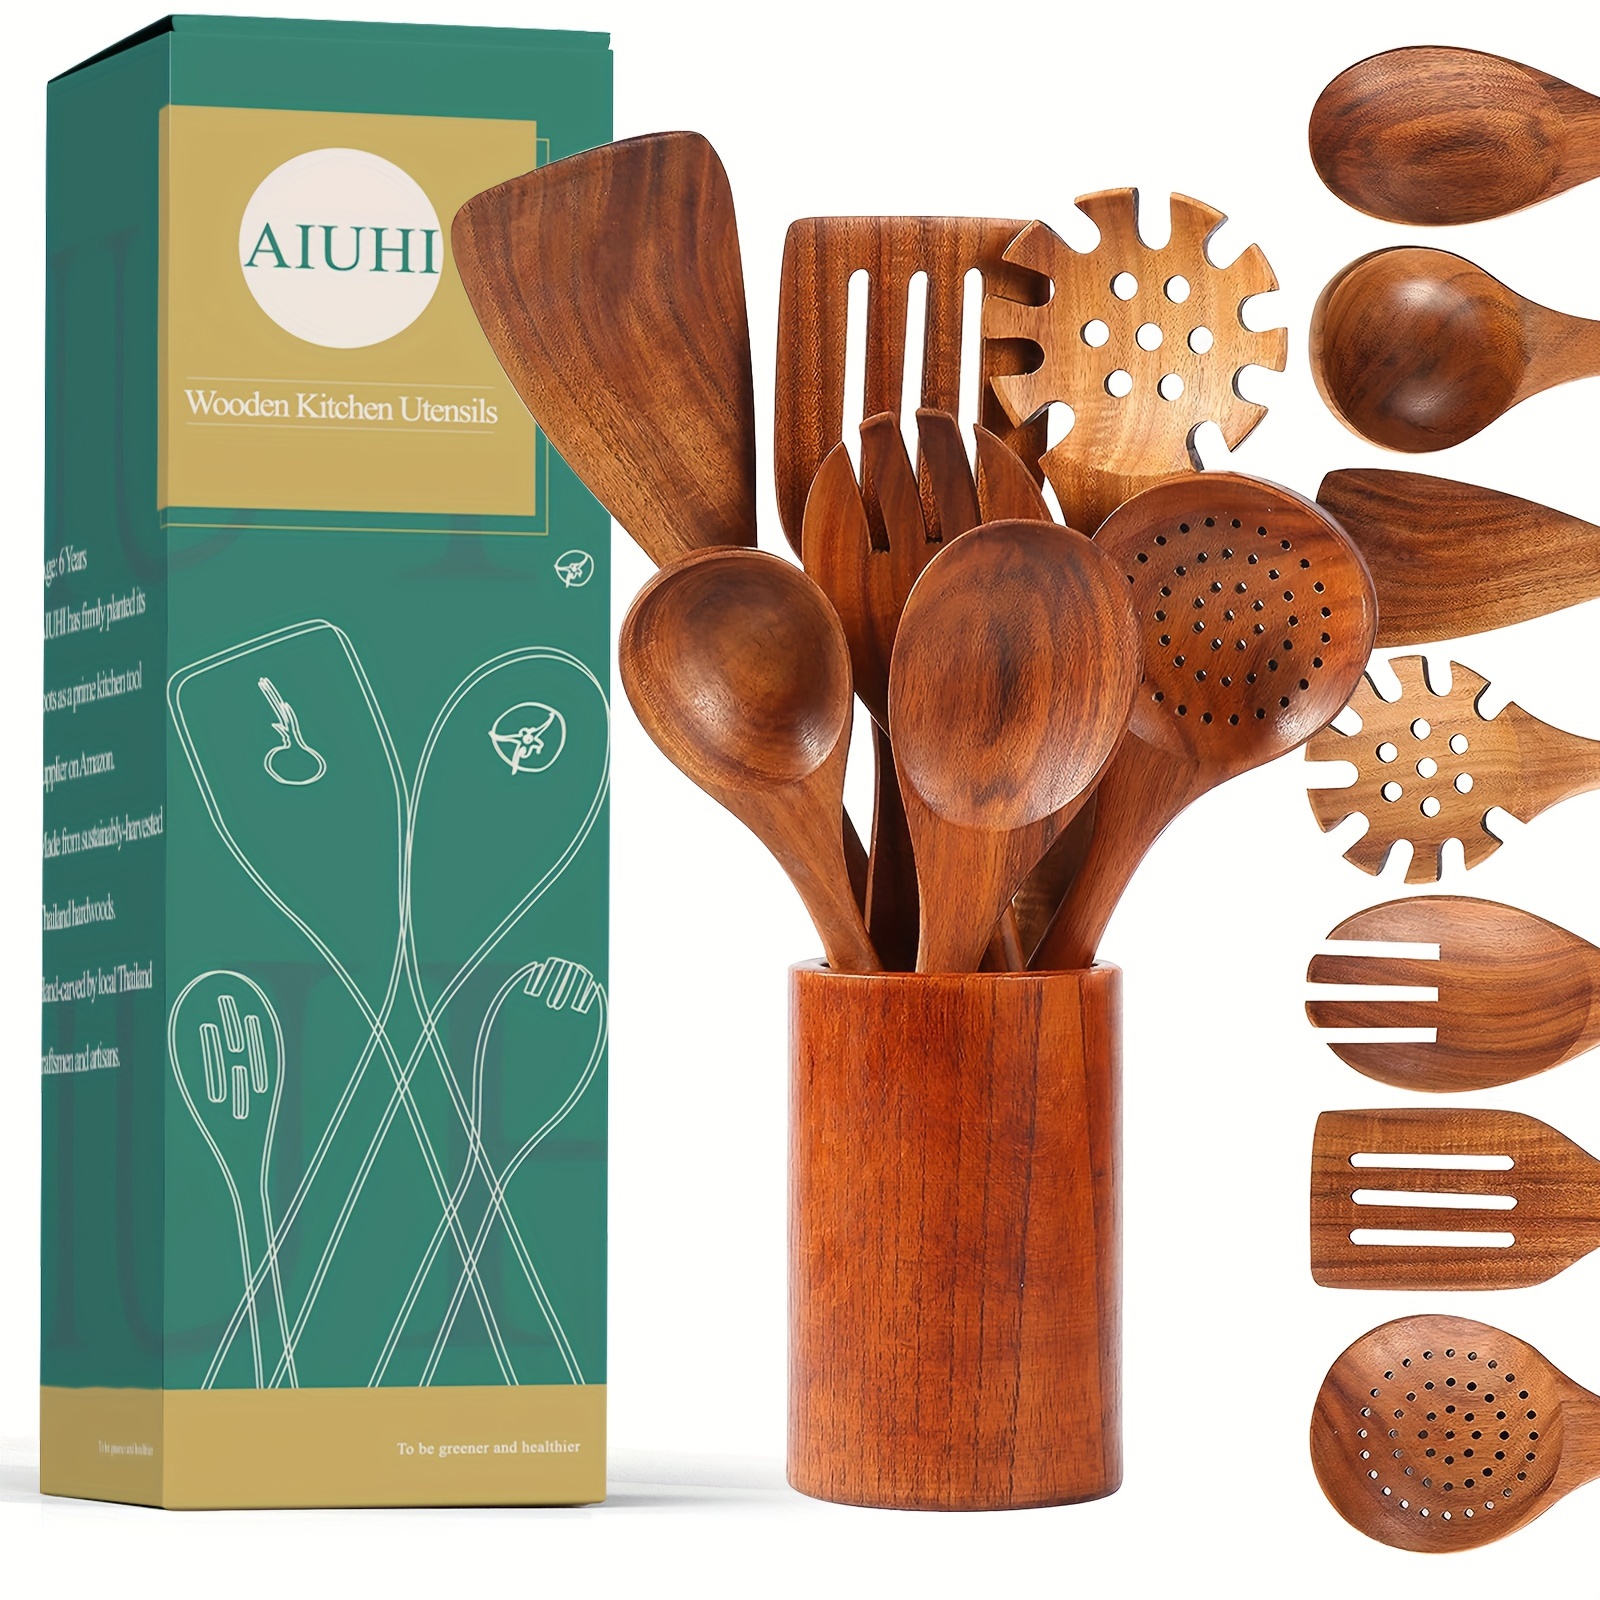 aiuhi 10 Pack Wooden Utensils for Cooking, Wood Utensil Set for Kitchen, Teak Wooden Spoon for Cooking, Non-Stick Spatula Lad